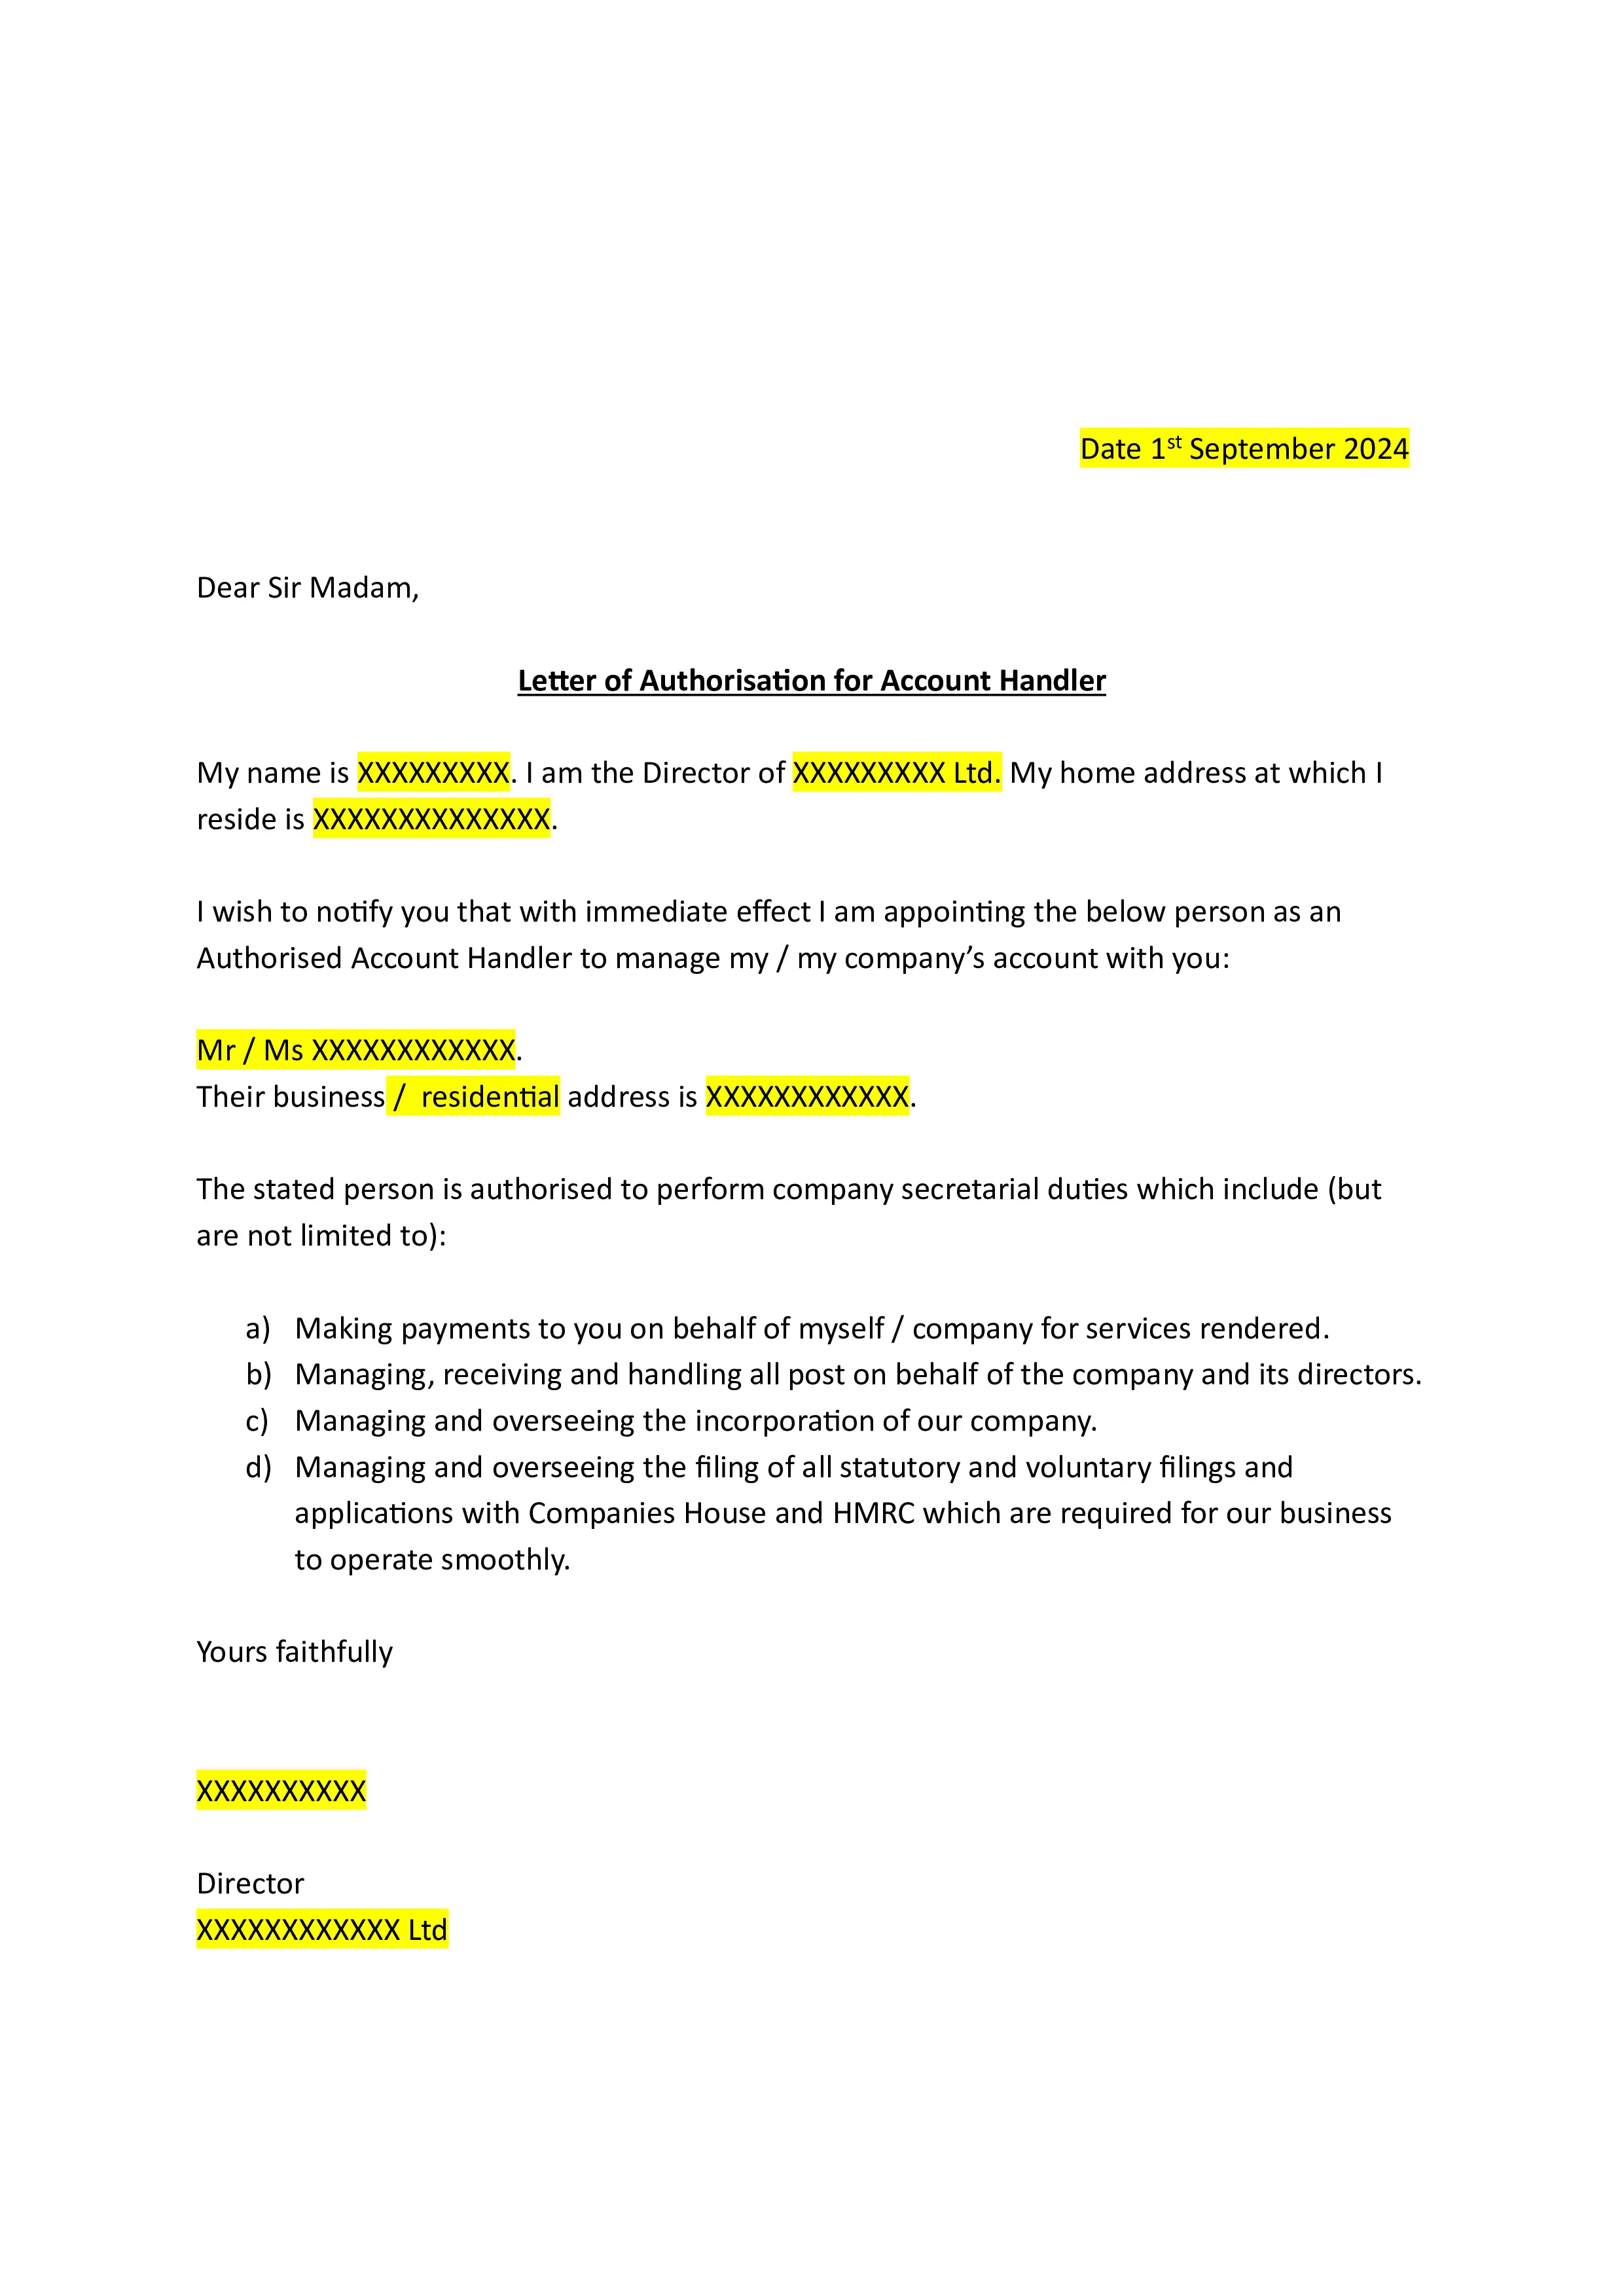 Sample letter of authorisation